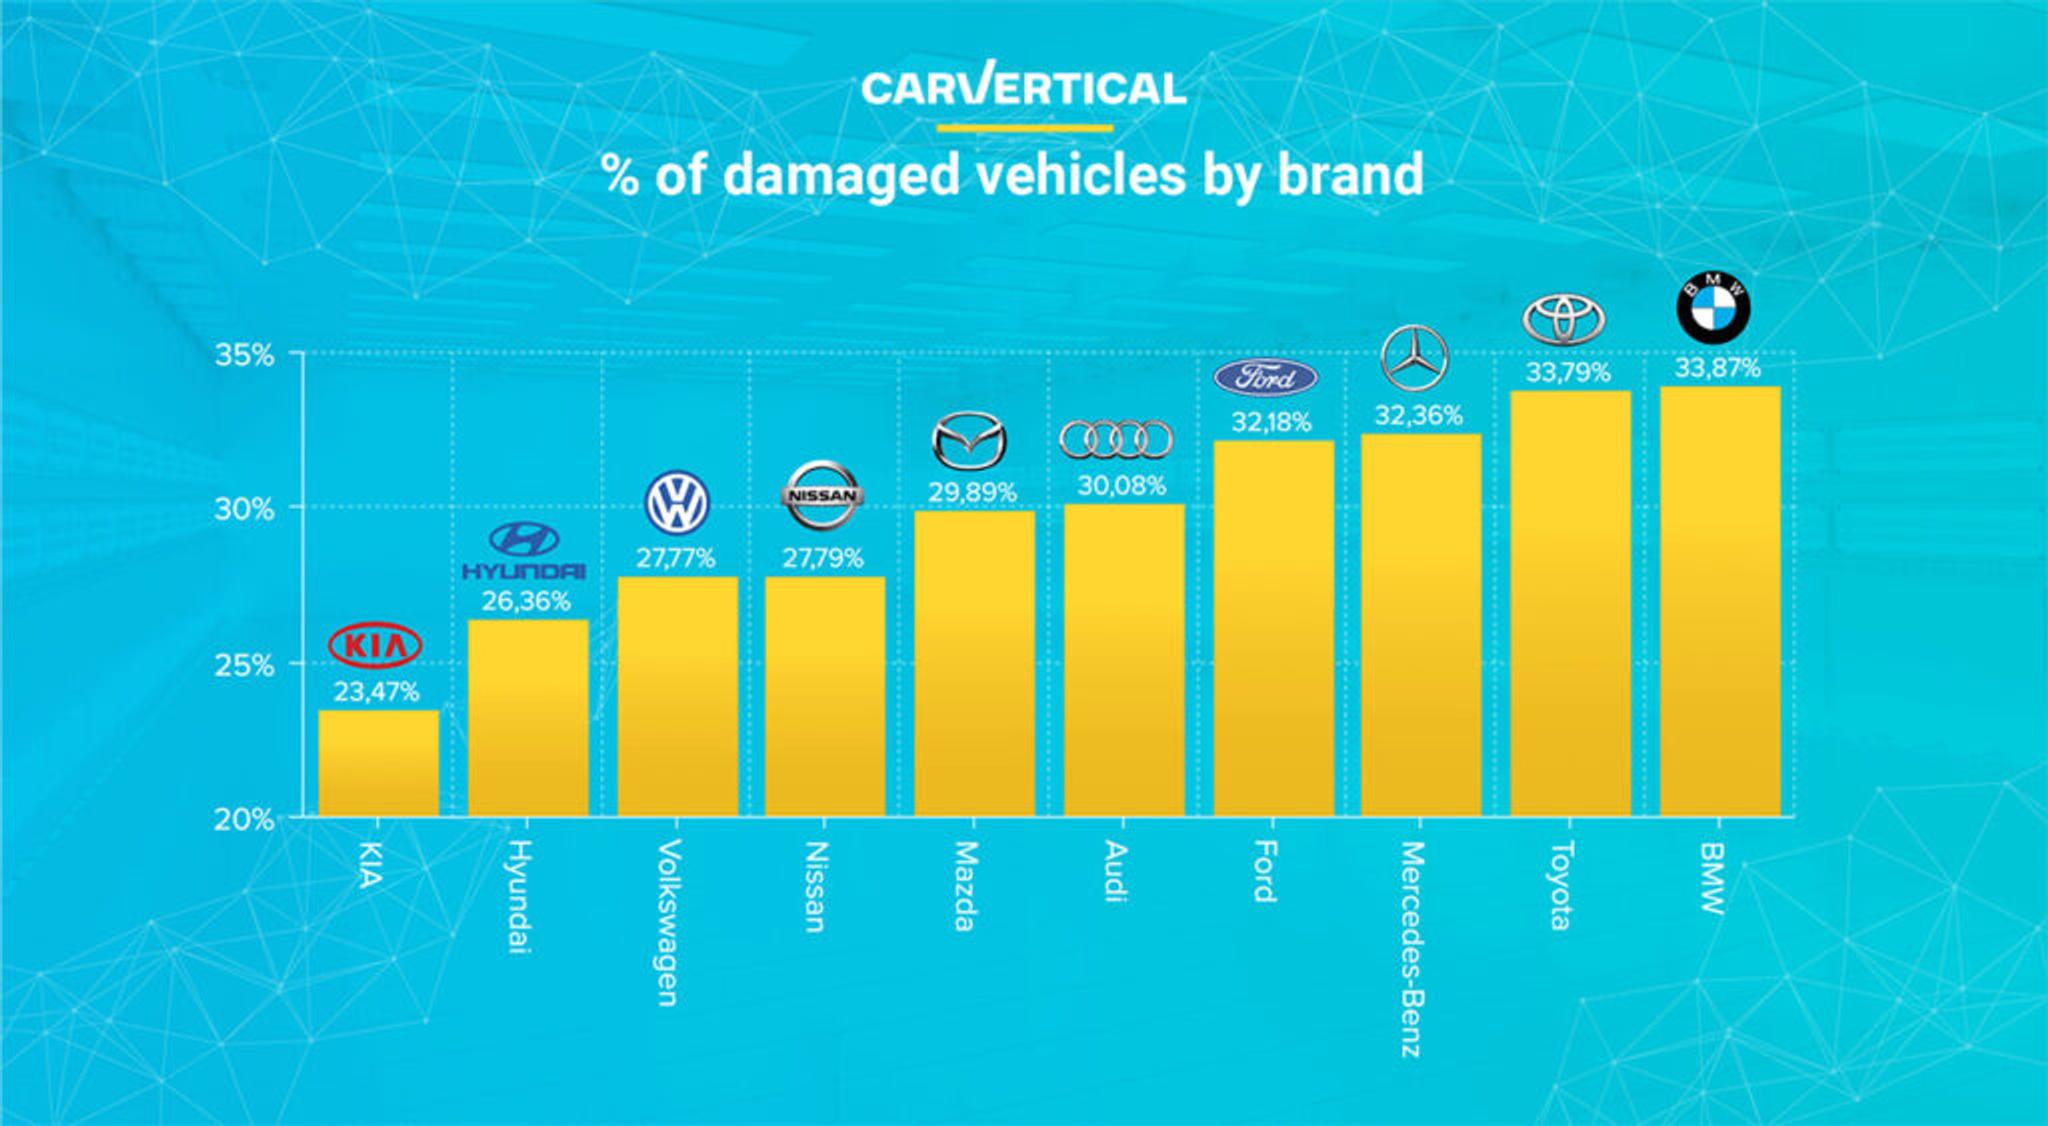 Percentage of damaged vehicles by brand